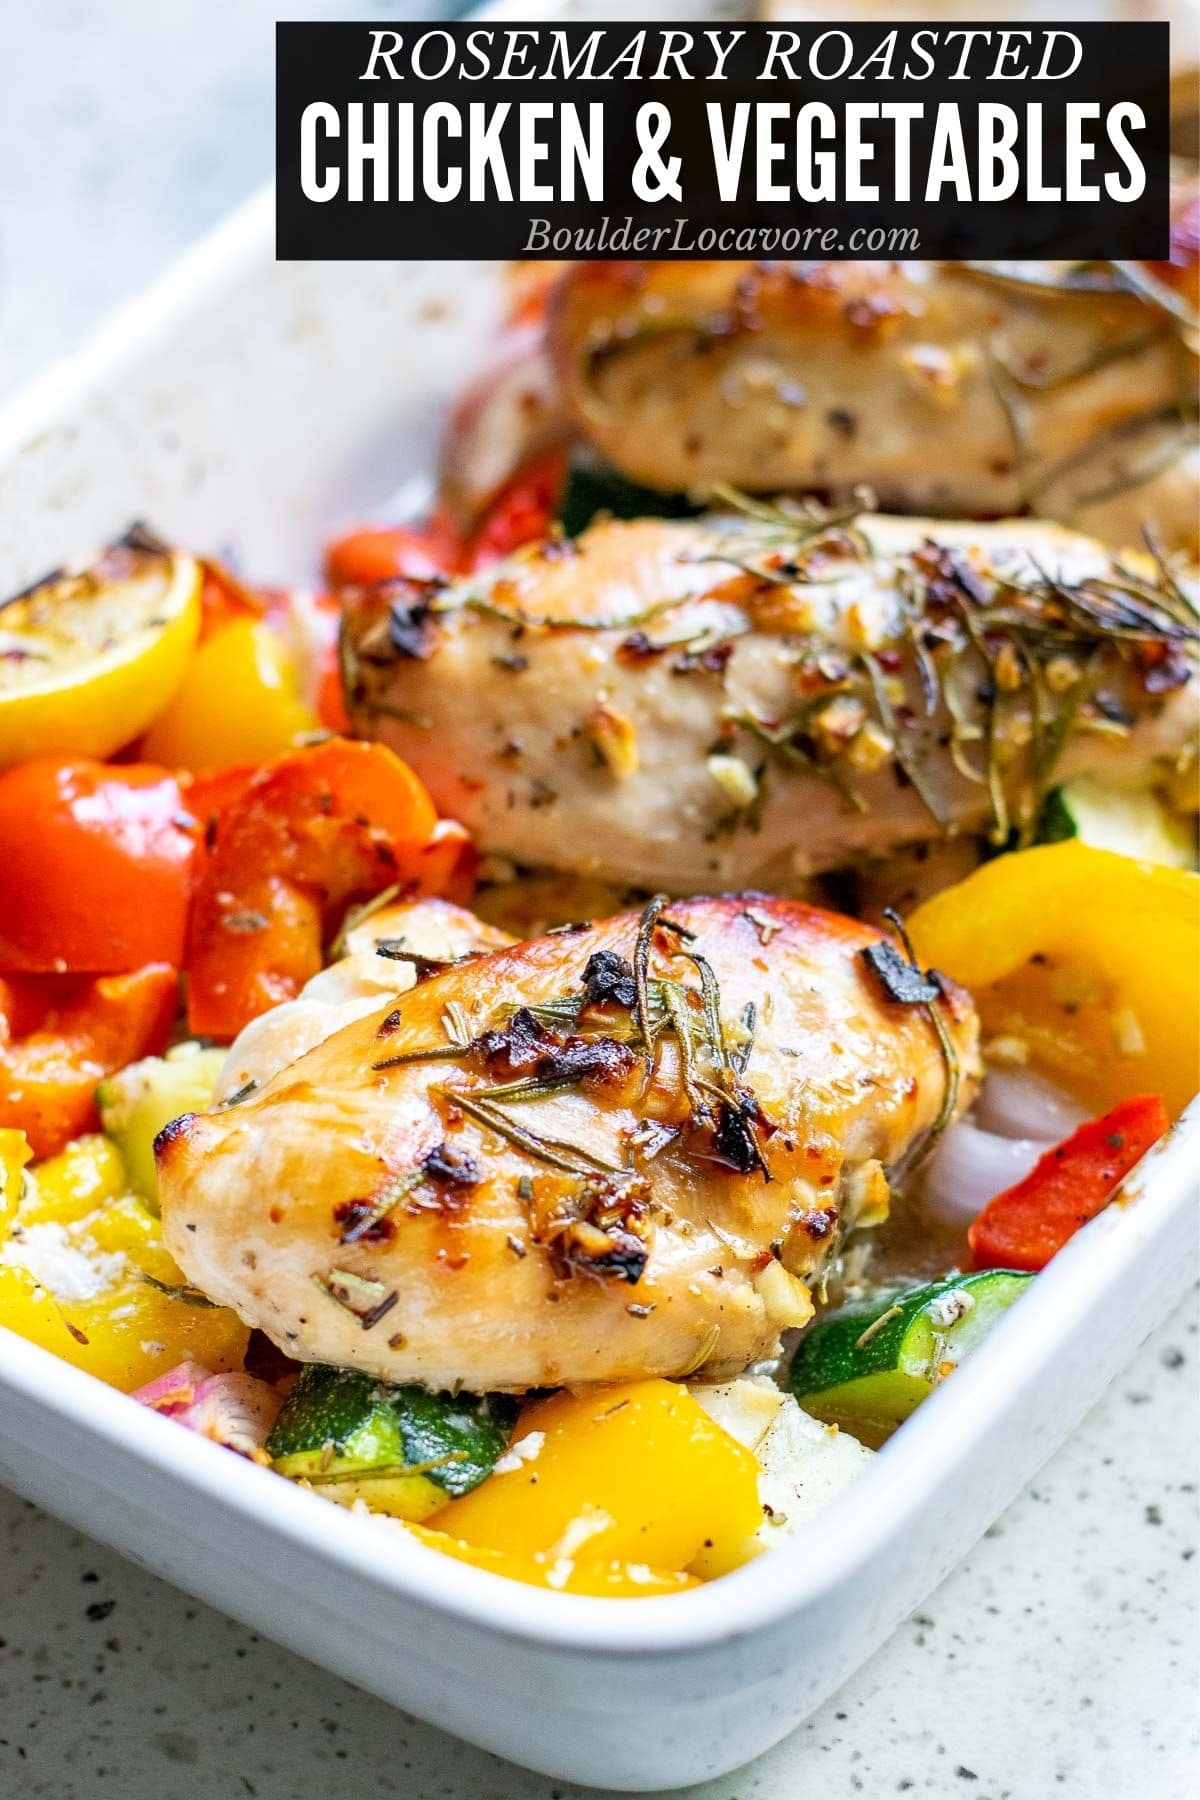 Roasted chicken breasts with vegetables title image